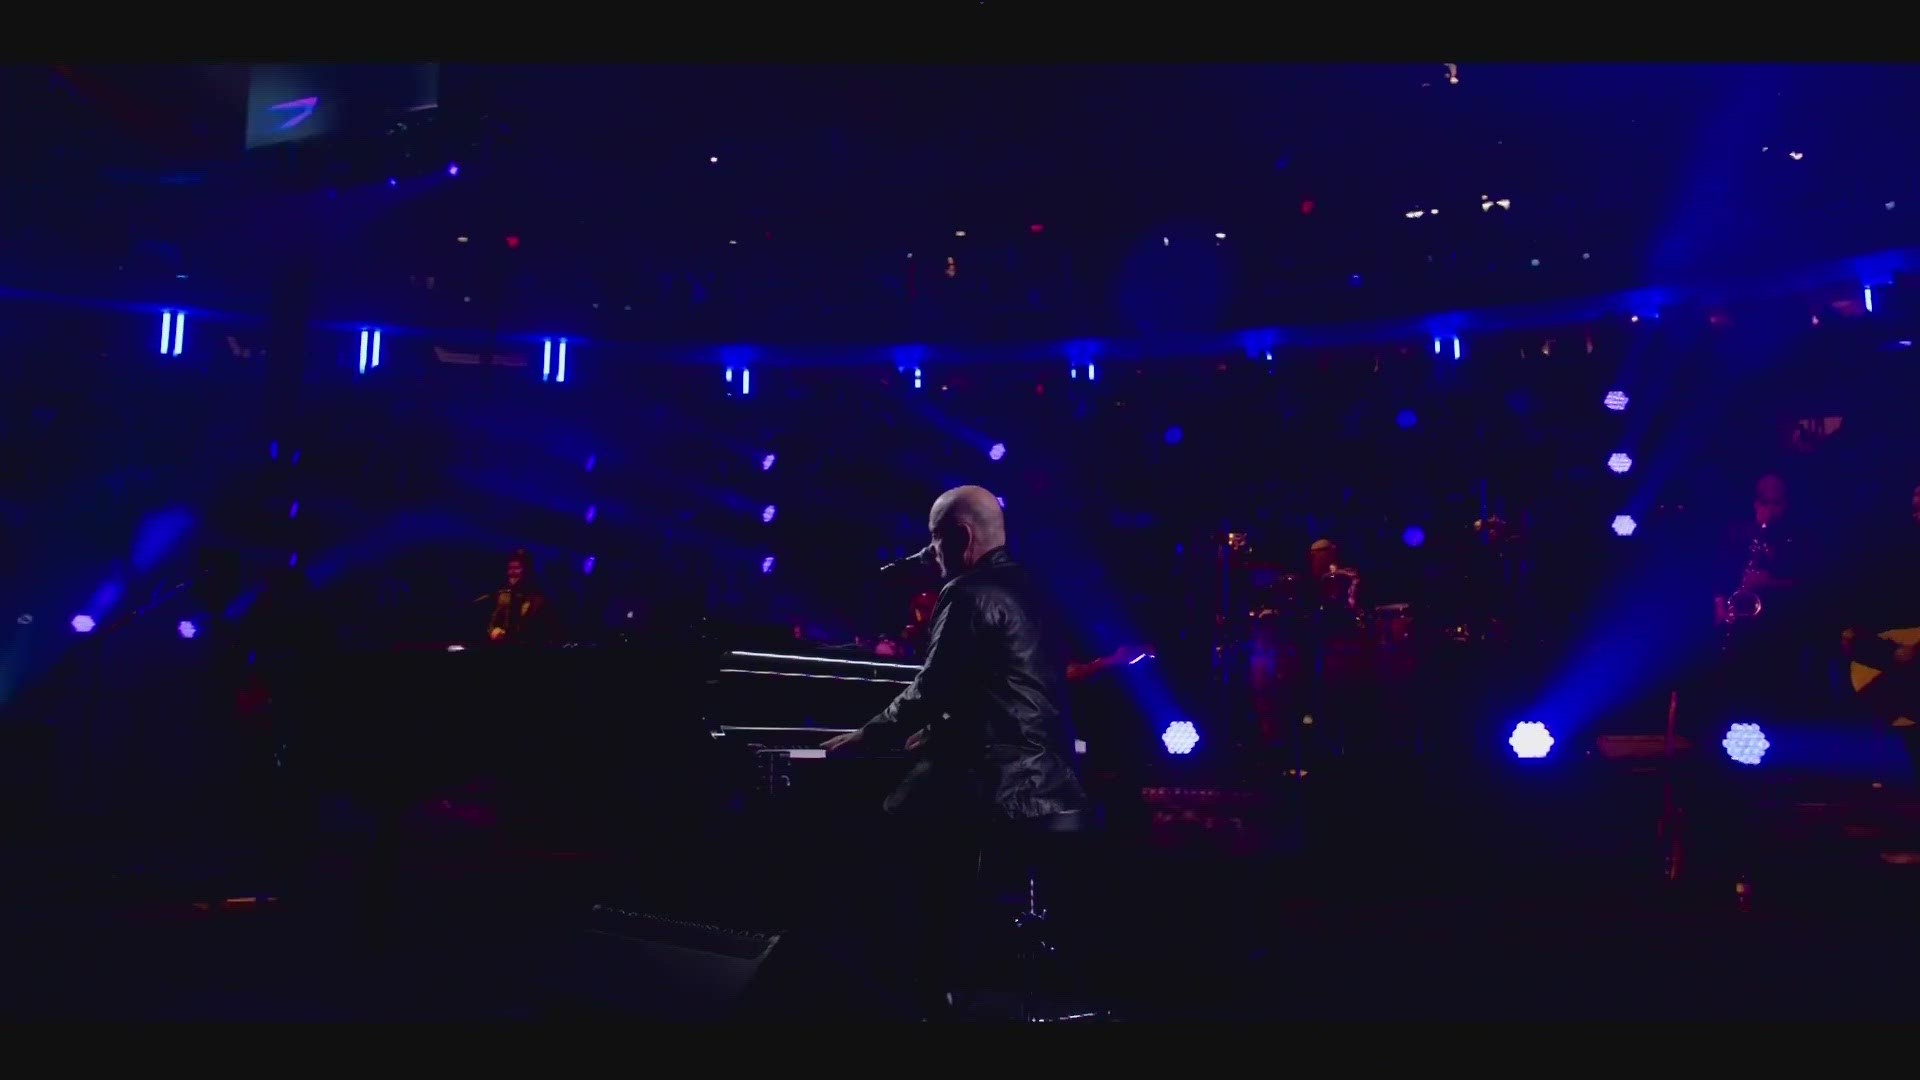 The concert special abruptly ended as Billy Joel was singing his signature song.